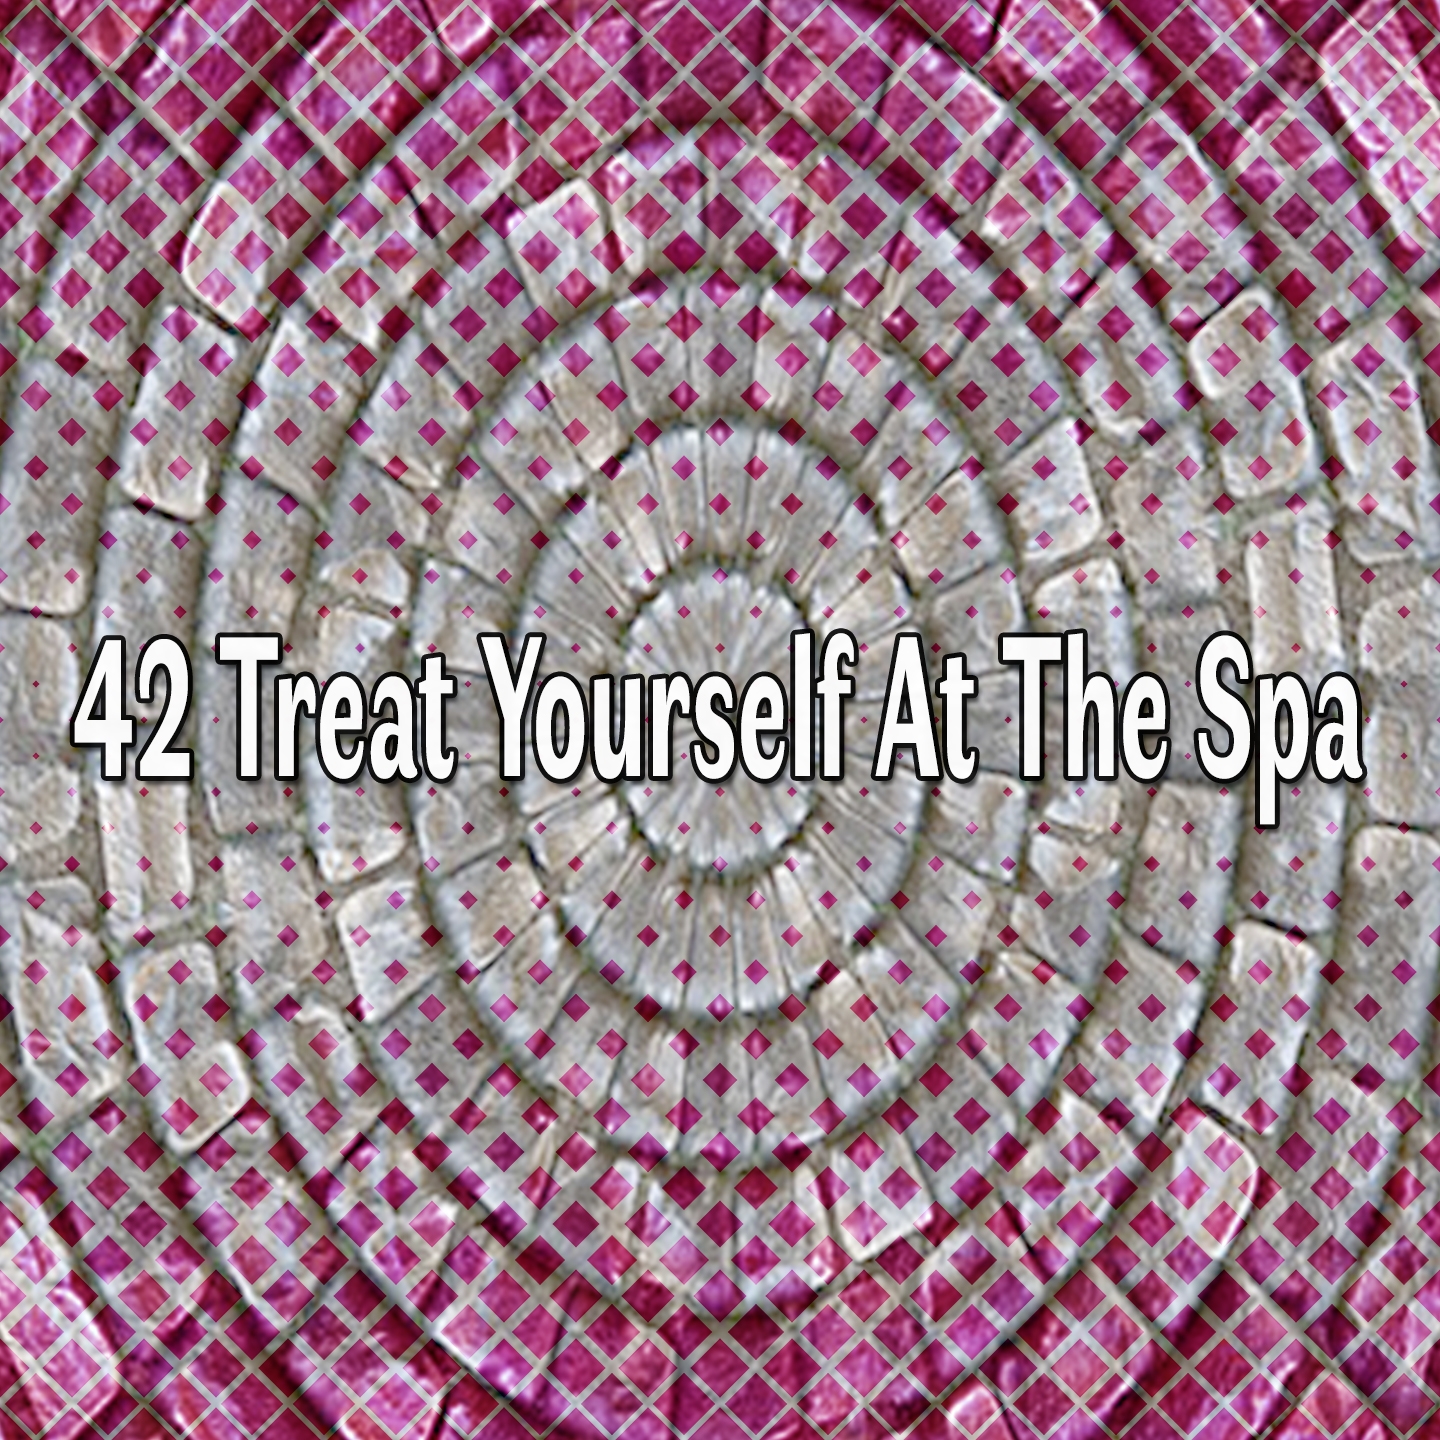 42 Treat Yourself At The Spa